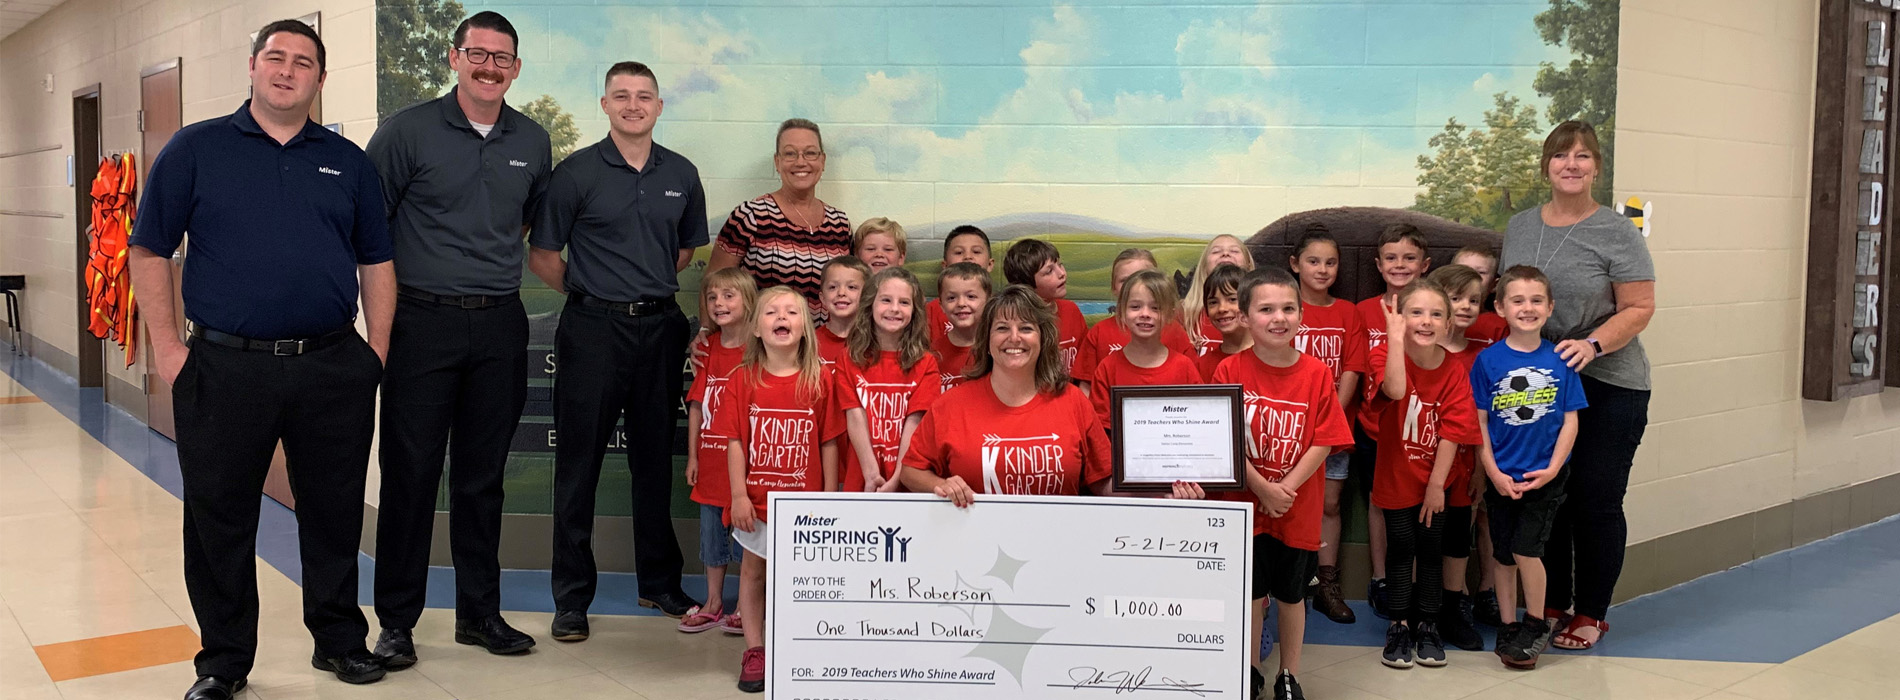 Mrs. Roberson of Station Camp Elementary, Gallatin, Tennessee, celebrates her 2019 Teachers Who Shine award with her class. A teacher for 22 years, Mrs. Roberson says she loves the hugs, laughs, small groups, field trips, projects, student-written letters, and most of all "seeing the light bulb go off” when students get it.